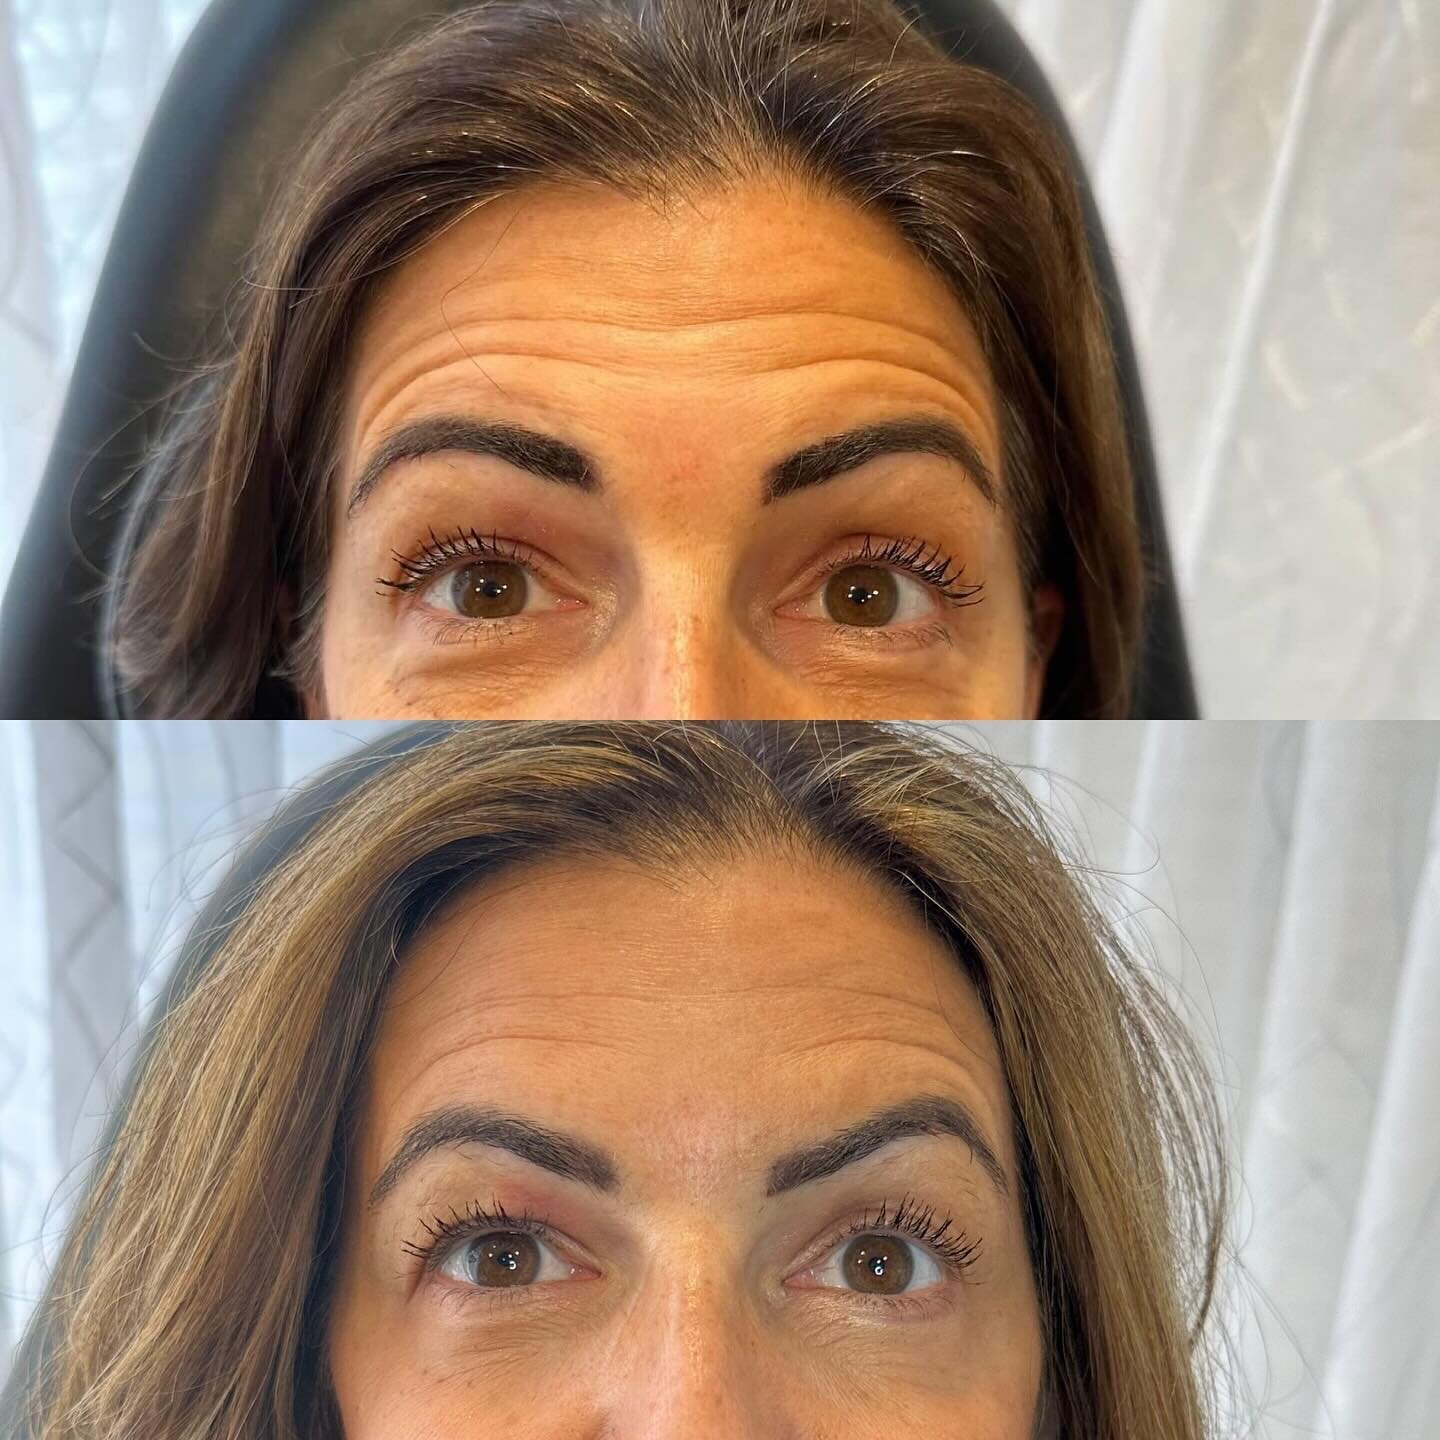 Myth: If I get botox I will look frozen and not be able to make any expressions.

Truth: You can get botox and maintain a natural look that appears younger and more refreshed.

That&rsquo;s exactly what this client requested - a refreshed and natural